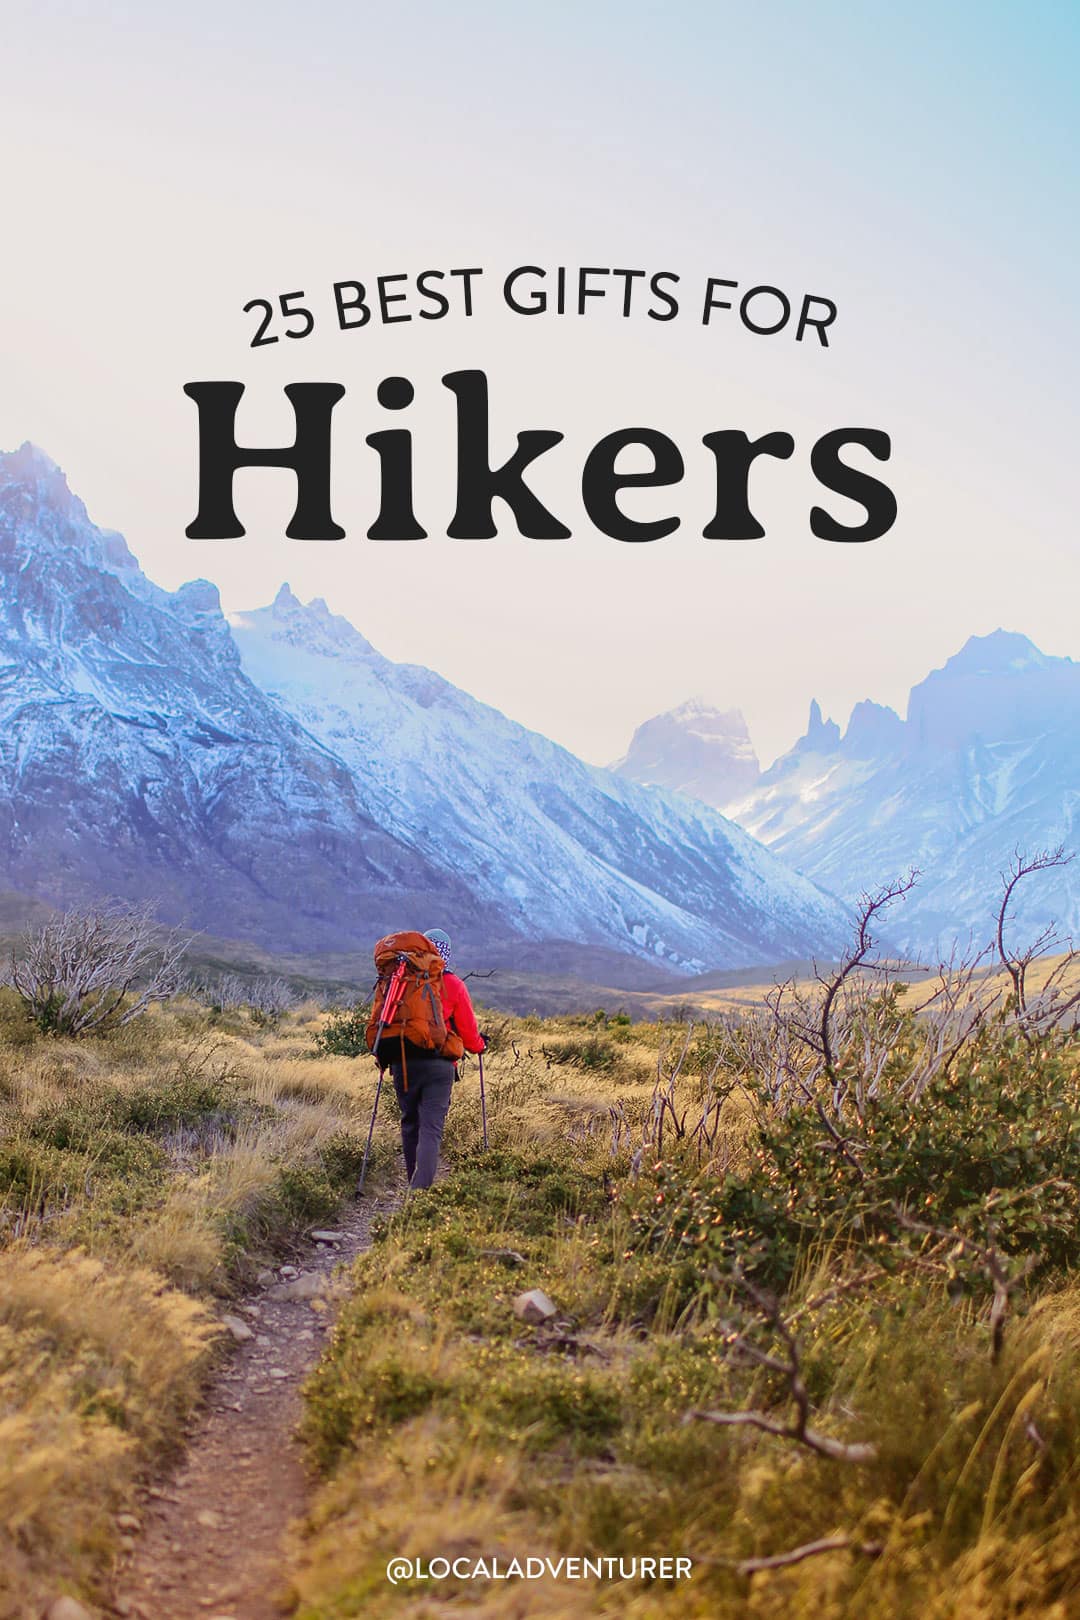 25 best gifts for hikers